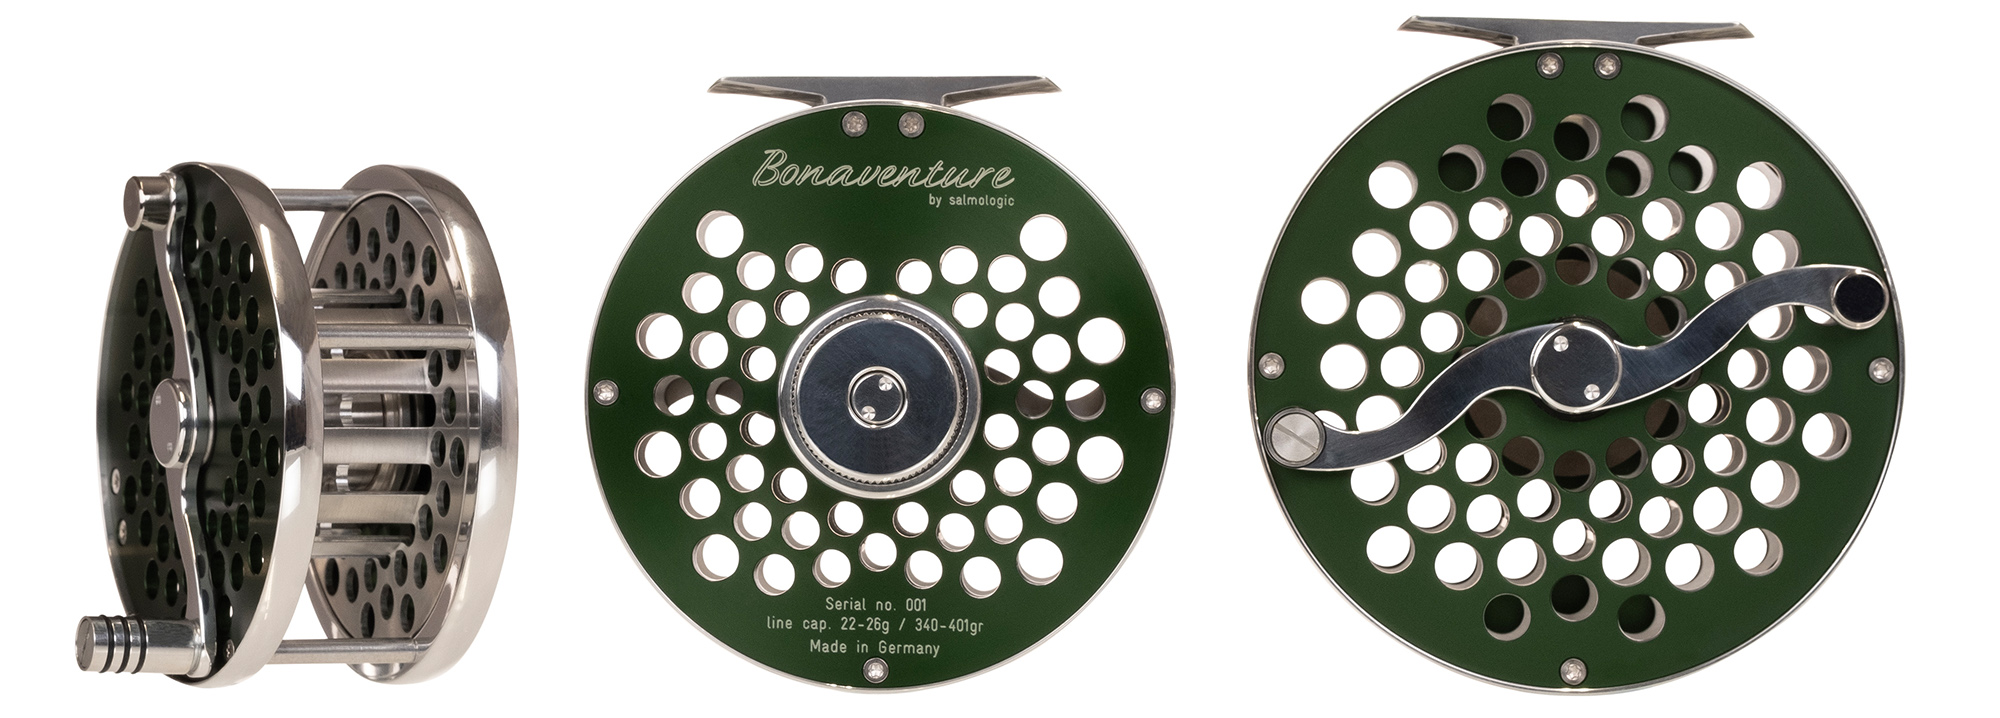 Fly Reel 10-11 Line Weight Fishing Reels for sale